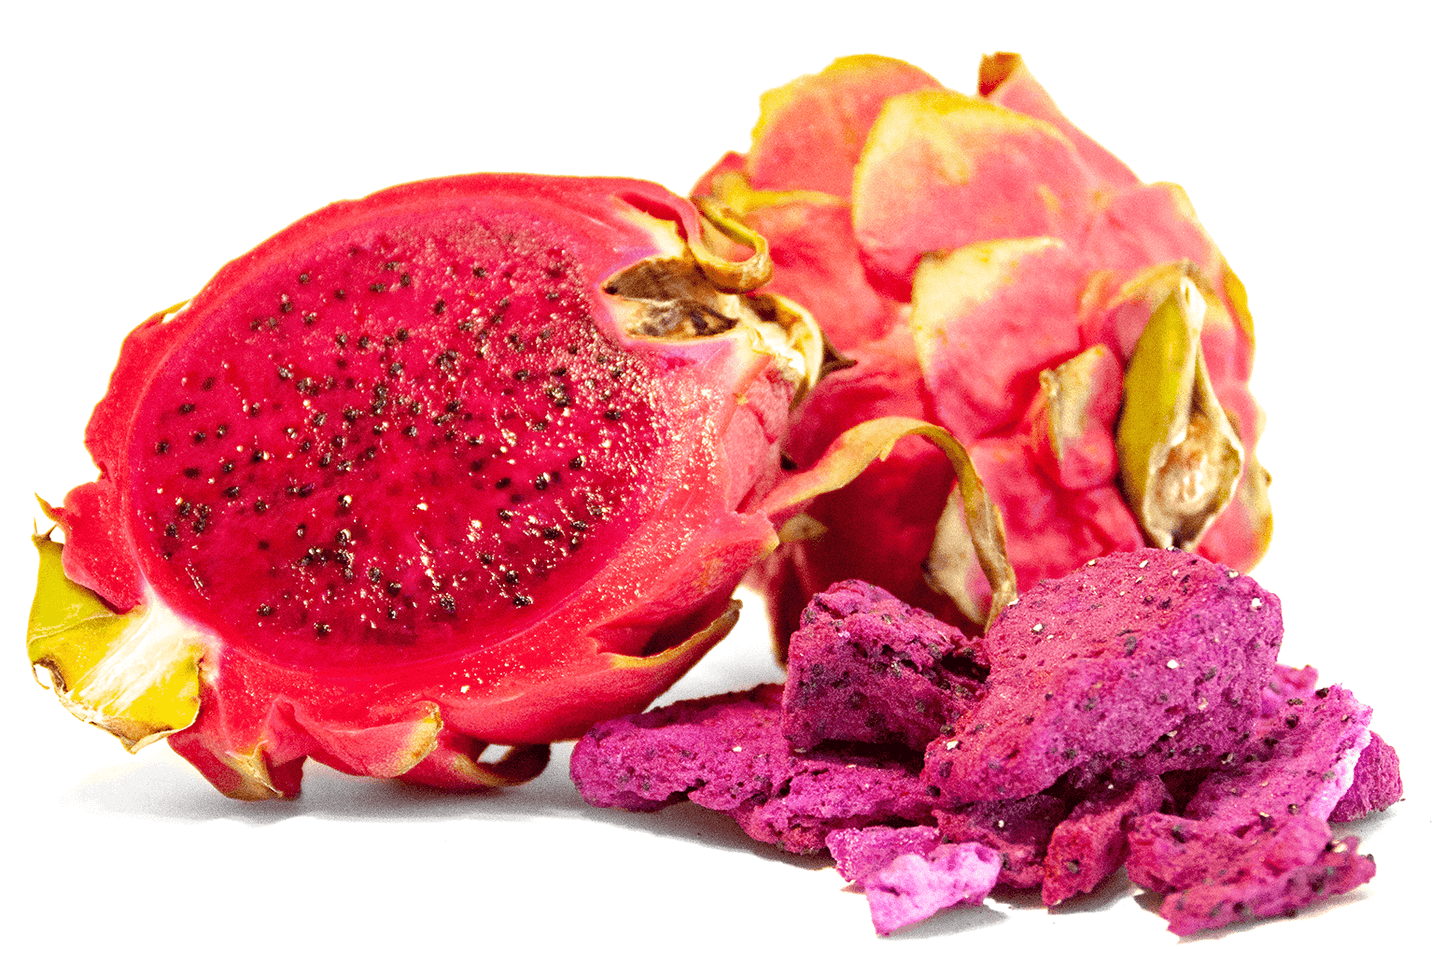 Freeze Dried Dragon Fruit Snack by The Rotten Fruit Box